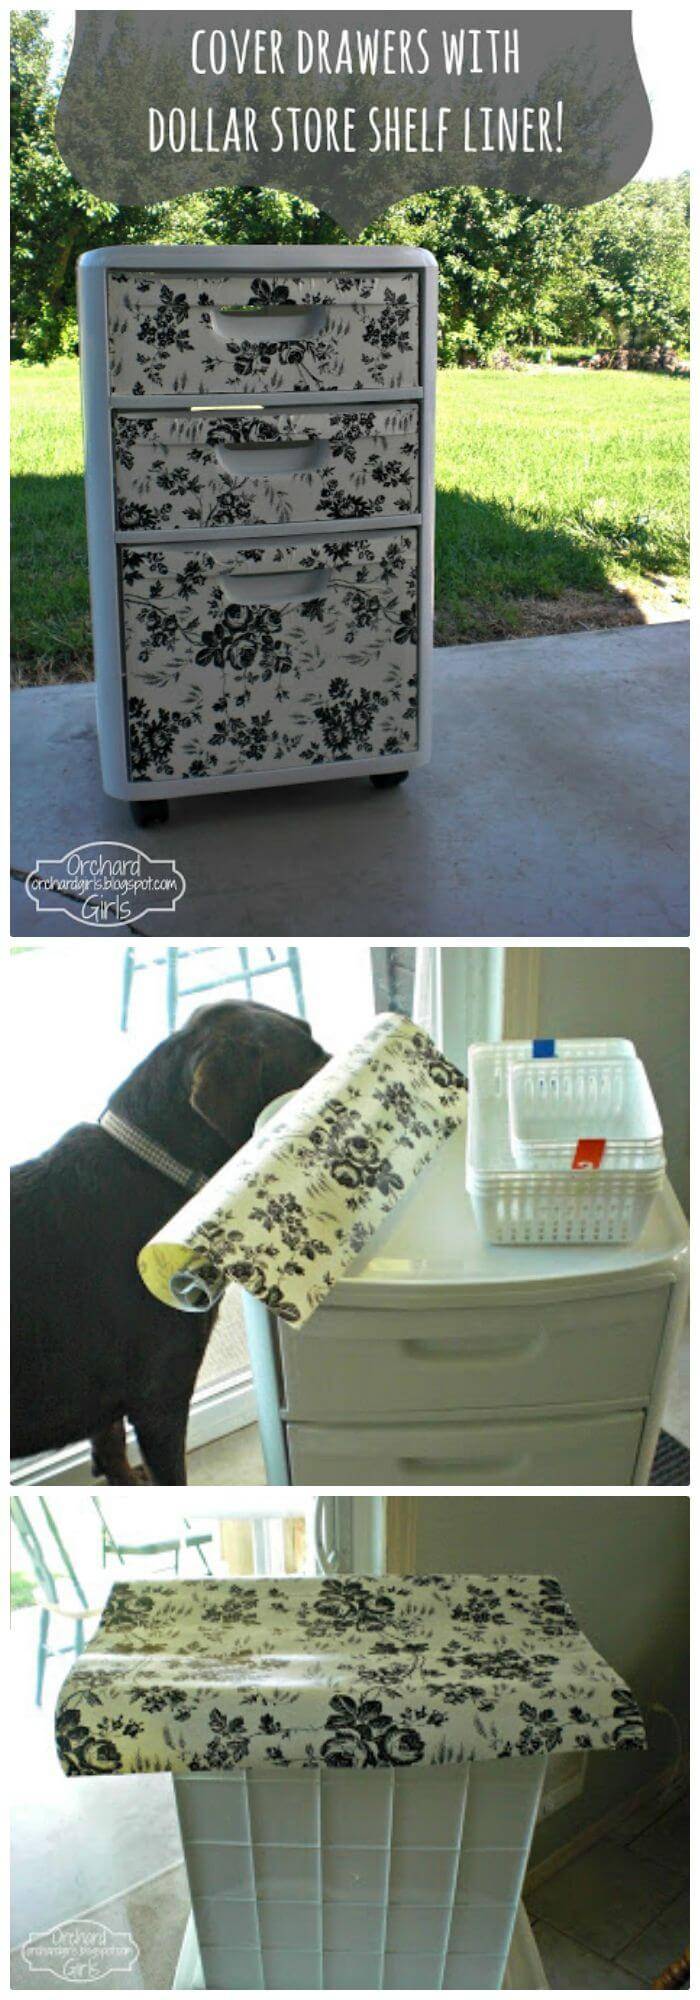 DIY Cover Drawers With Dollar Store Shelf Liner